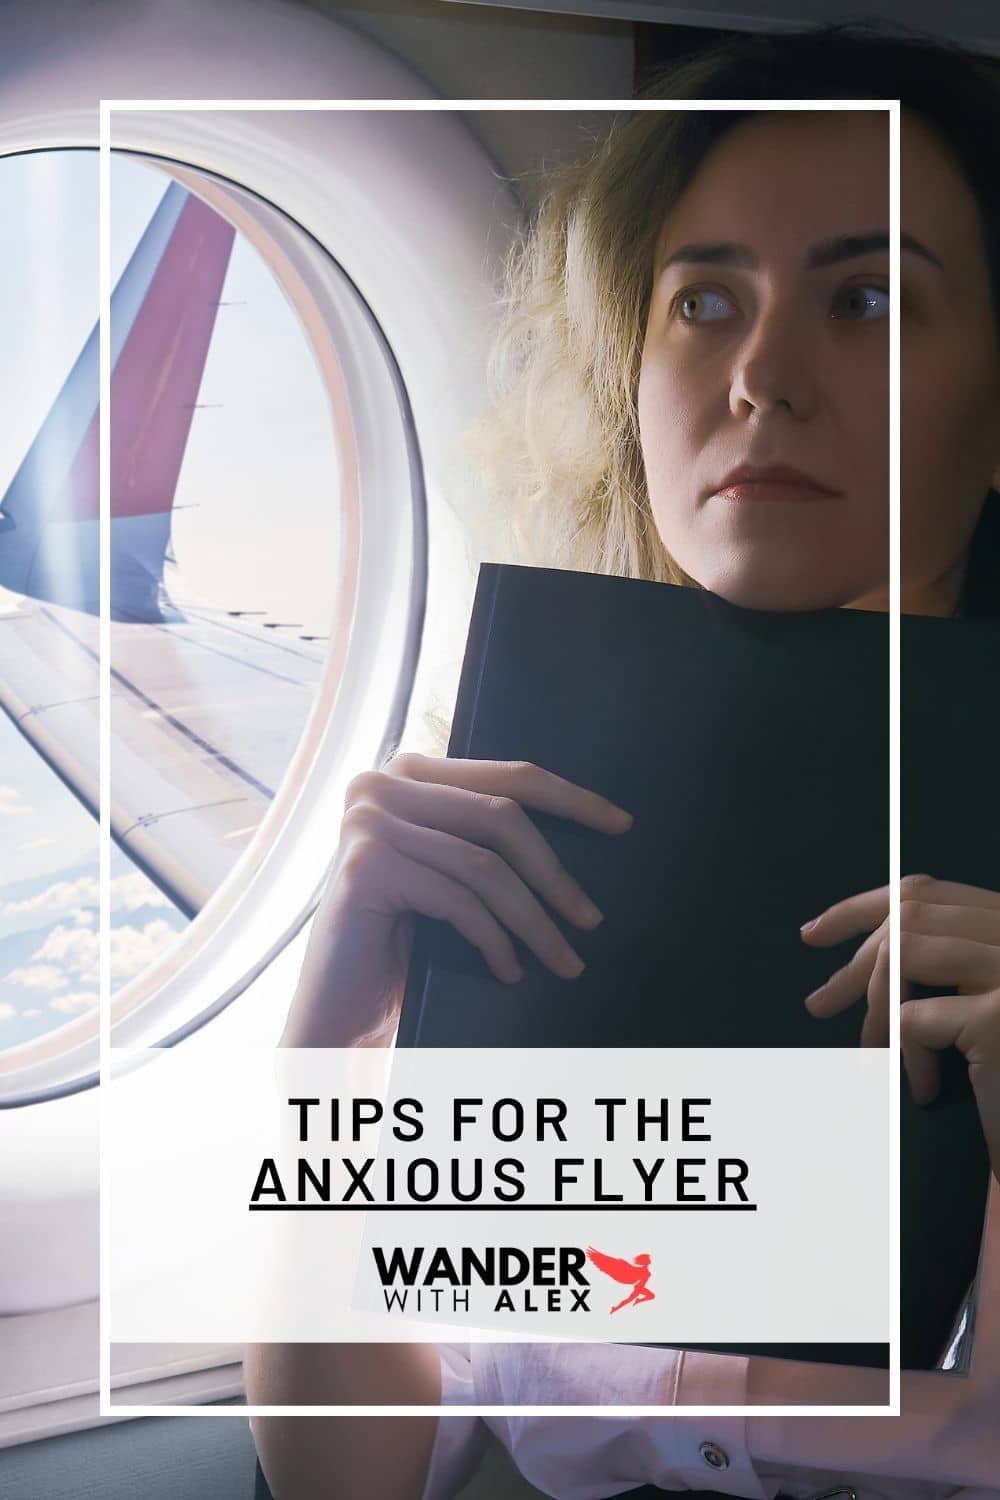 Tips for the Anxious Flyer